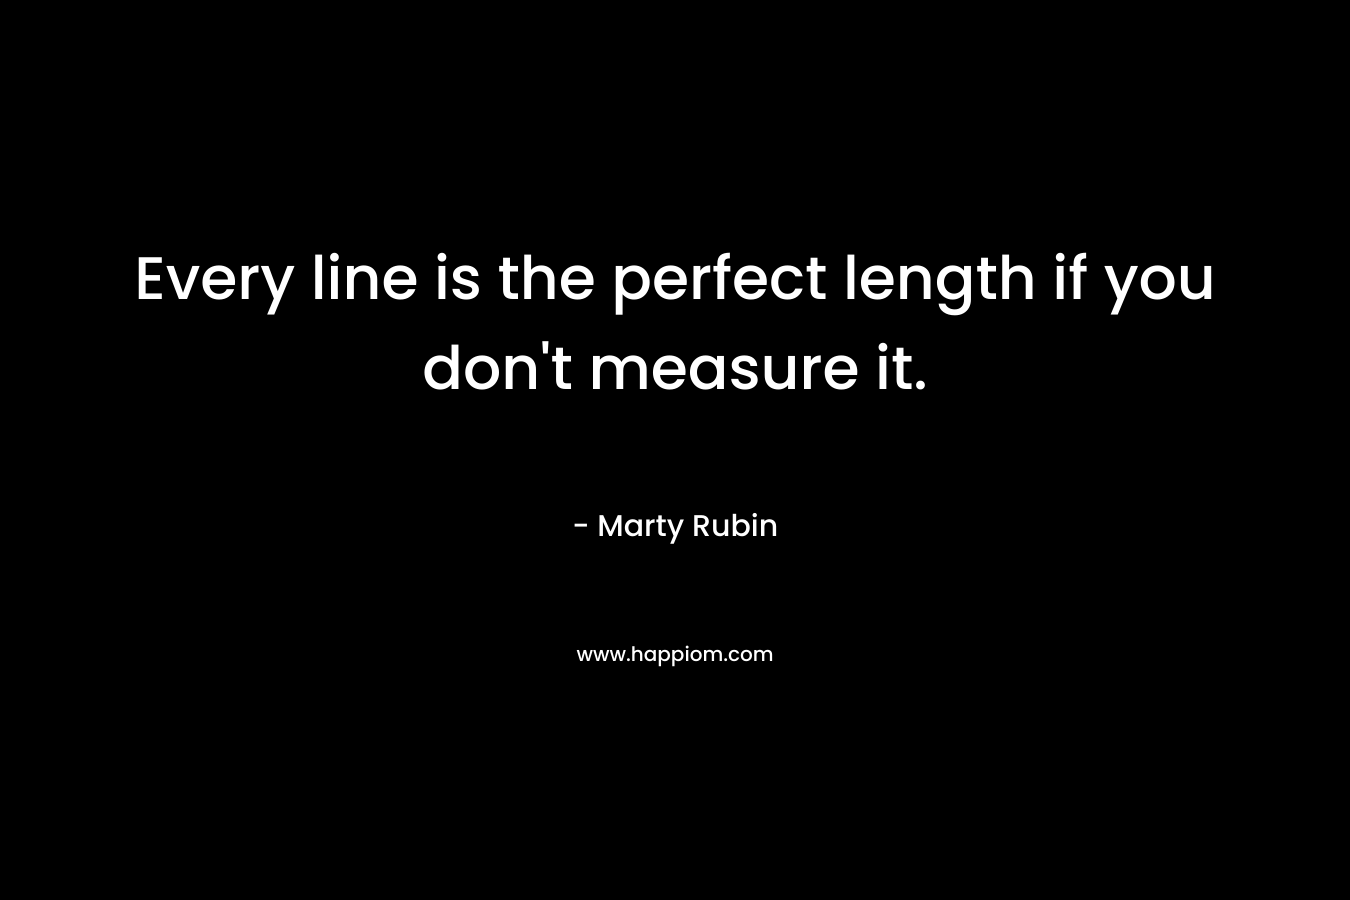 Every line is the perfect length if you don't measure it.